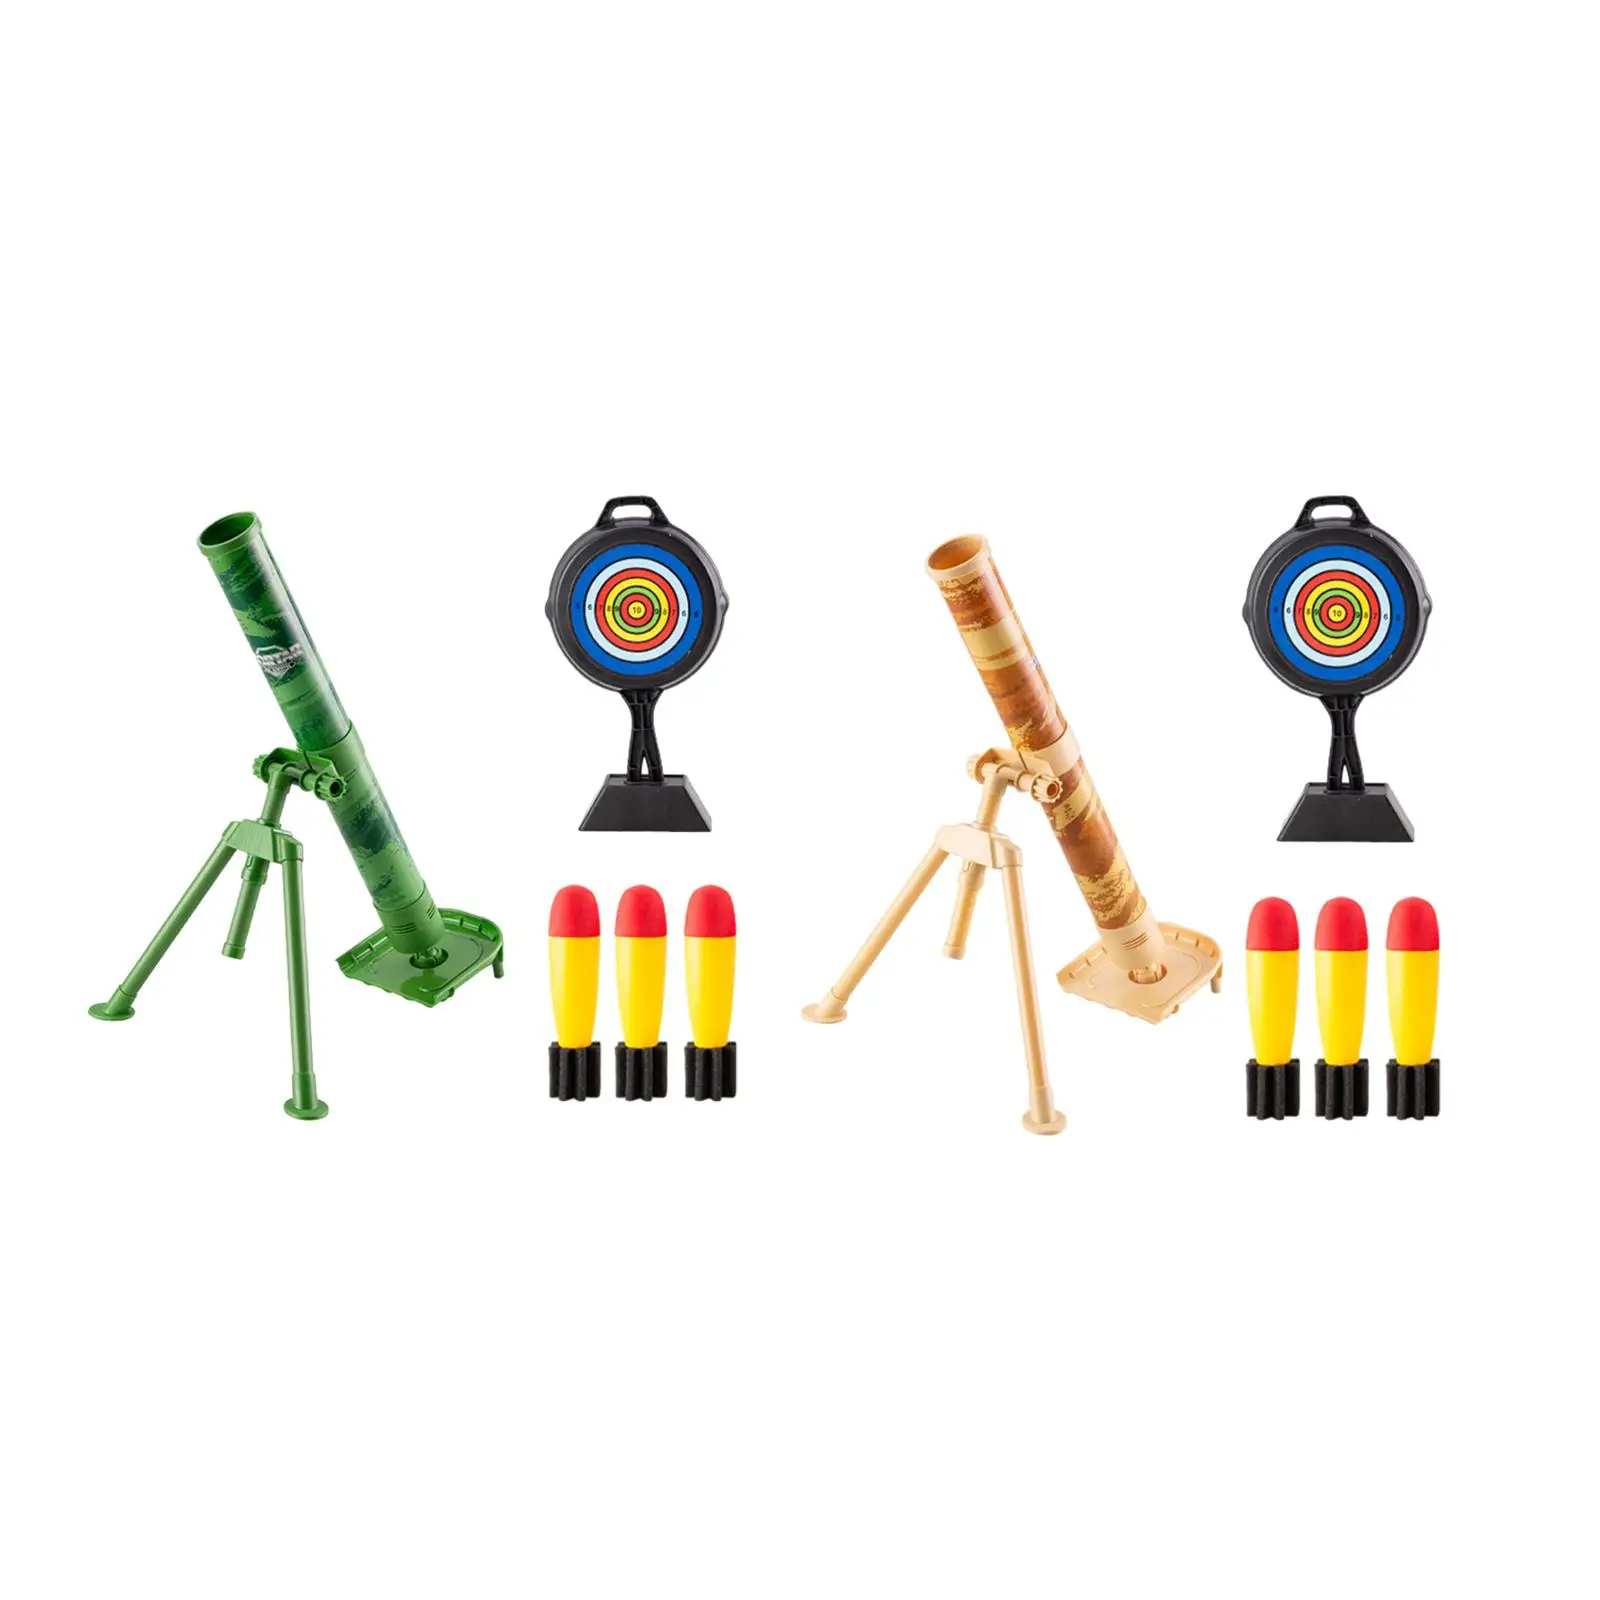 Mortar Launcher Toy Game Kits Launch Set for Kid Festival Gifts